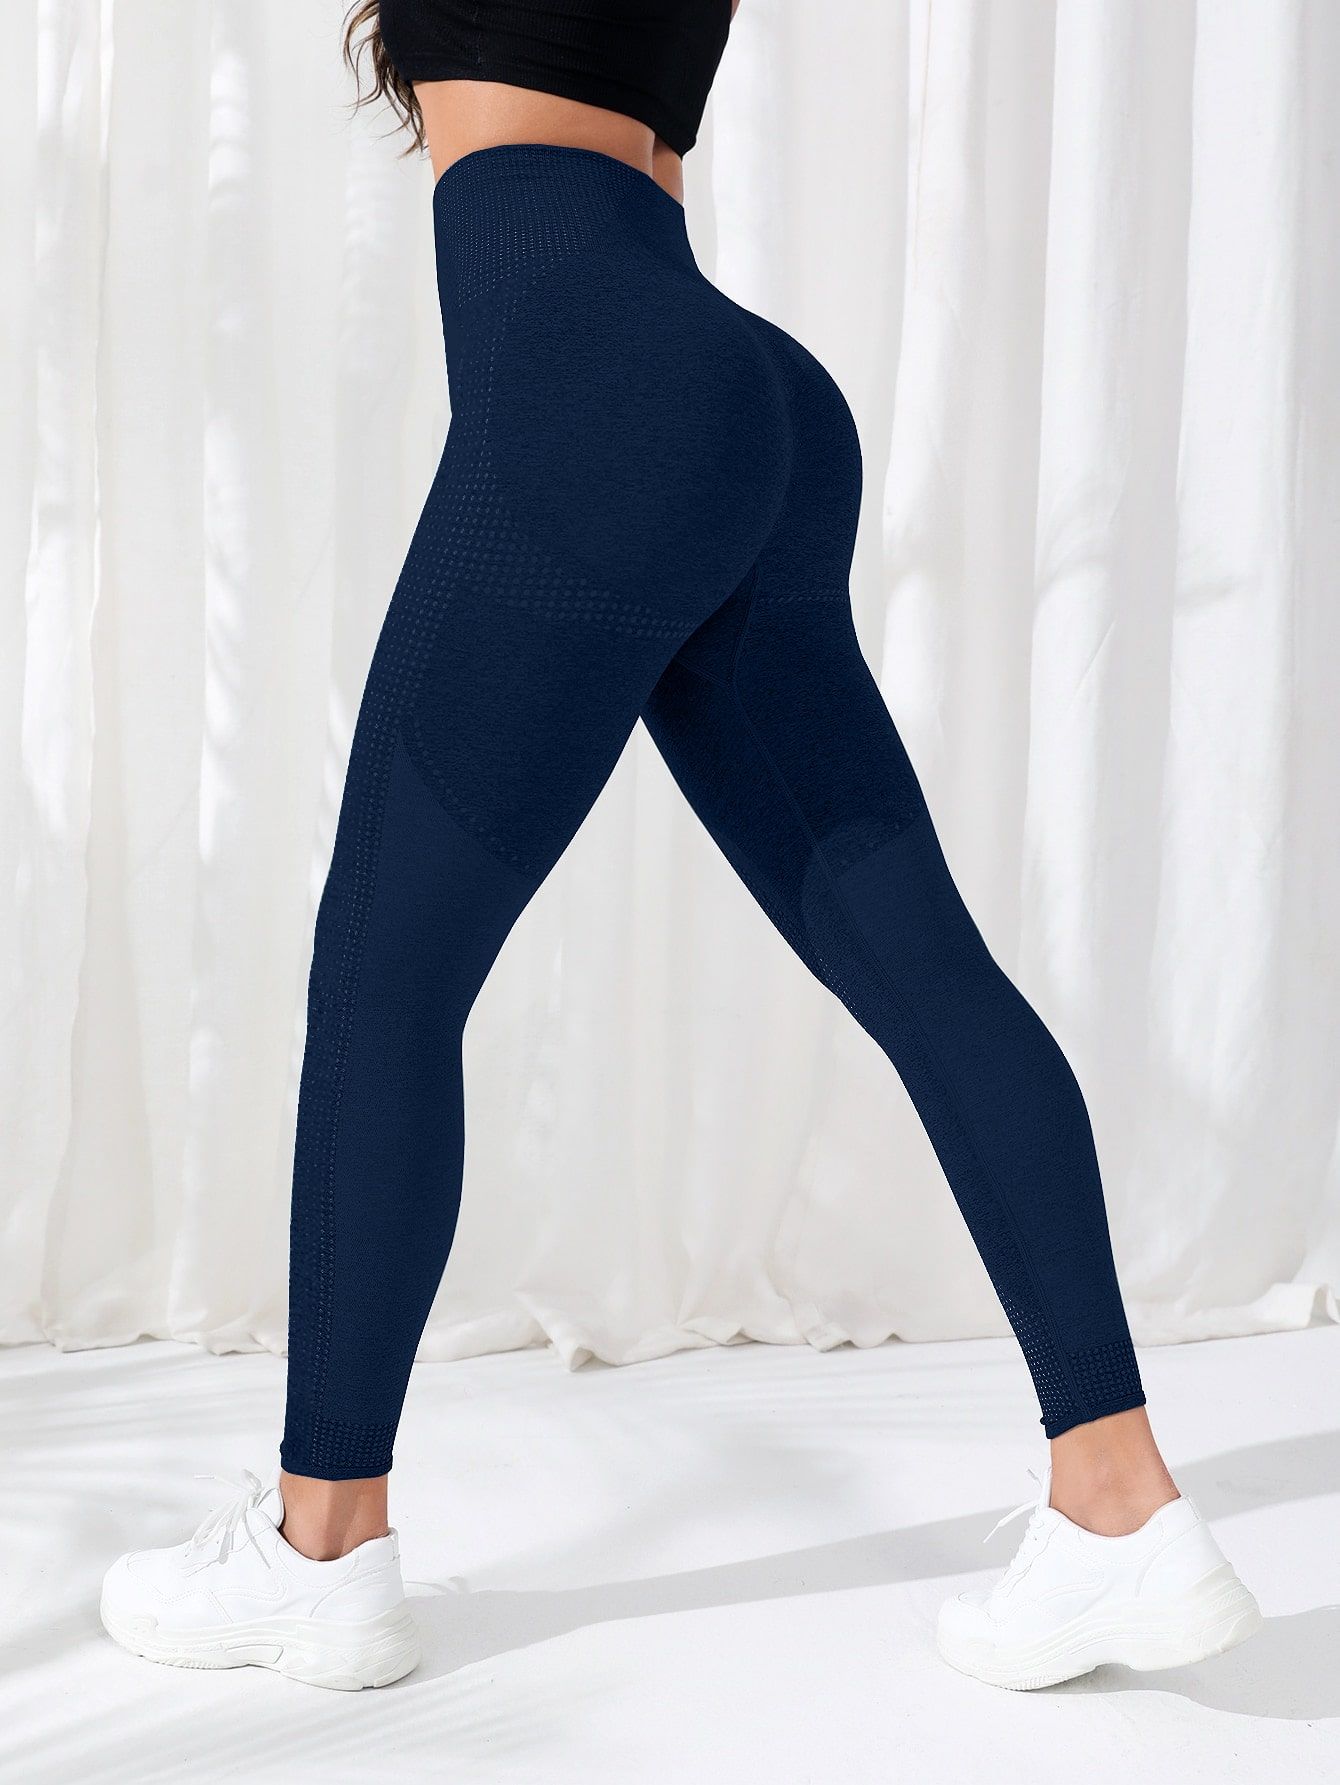 How to Wear Navy Blue Leggings: Best 13 Stylish & Casual Outfit Ideas